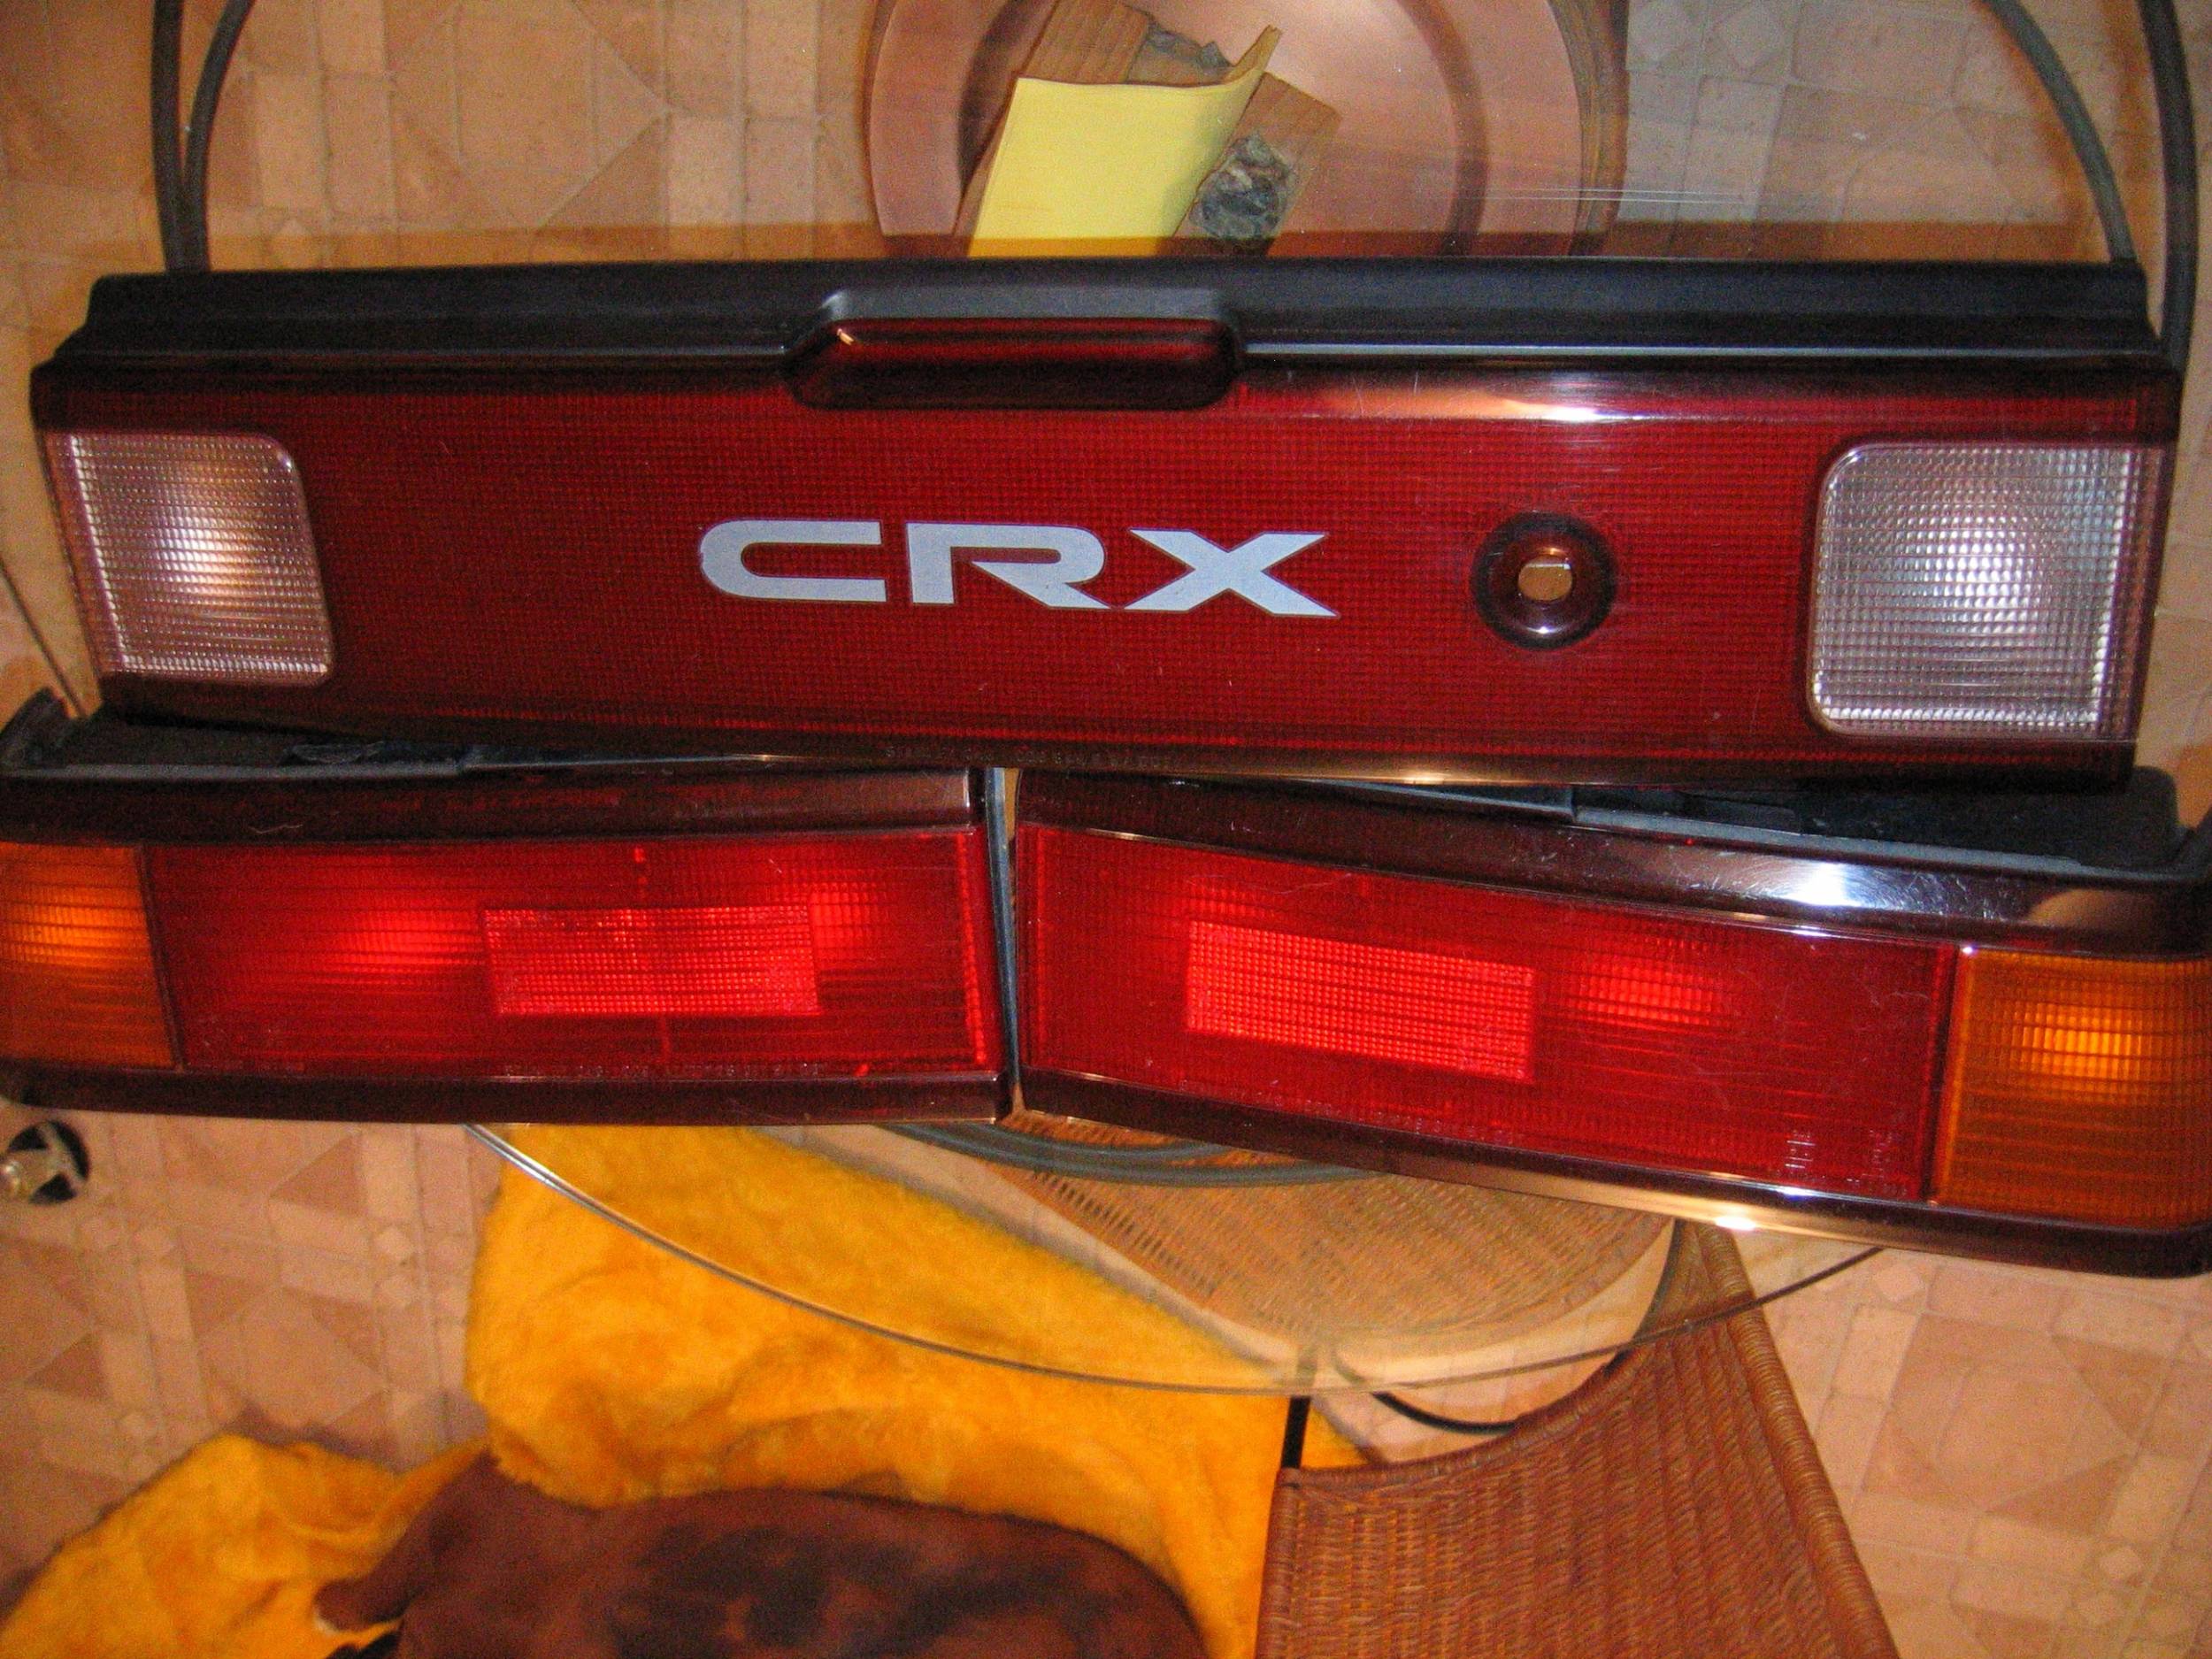 crx taillights